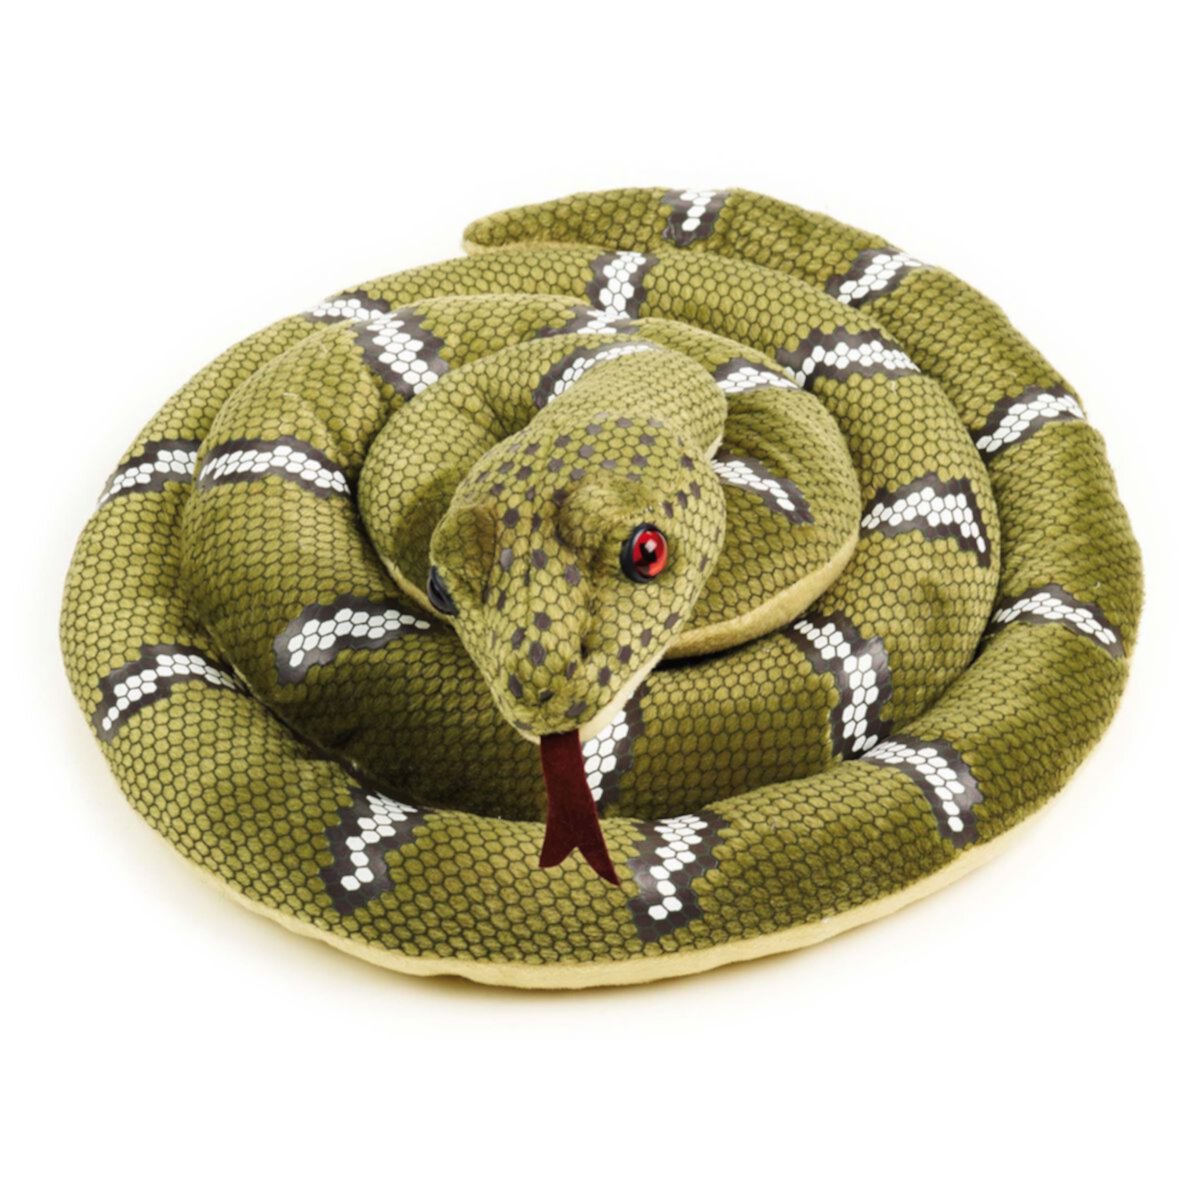 Плюшевые игрушки National Geographic Green Snake от Lelly National Geographic